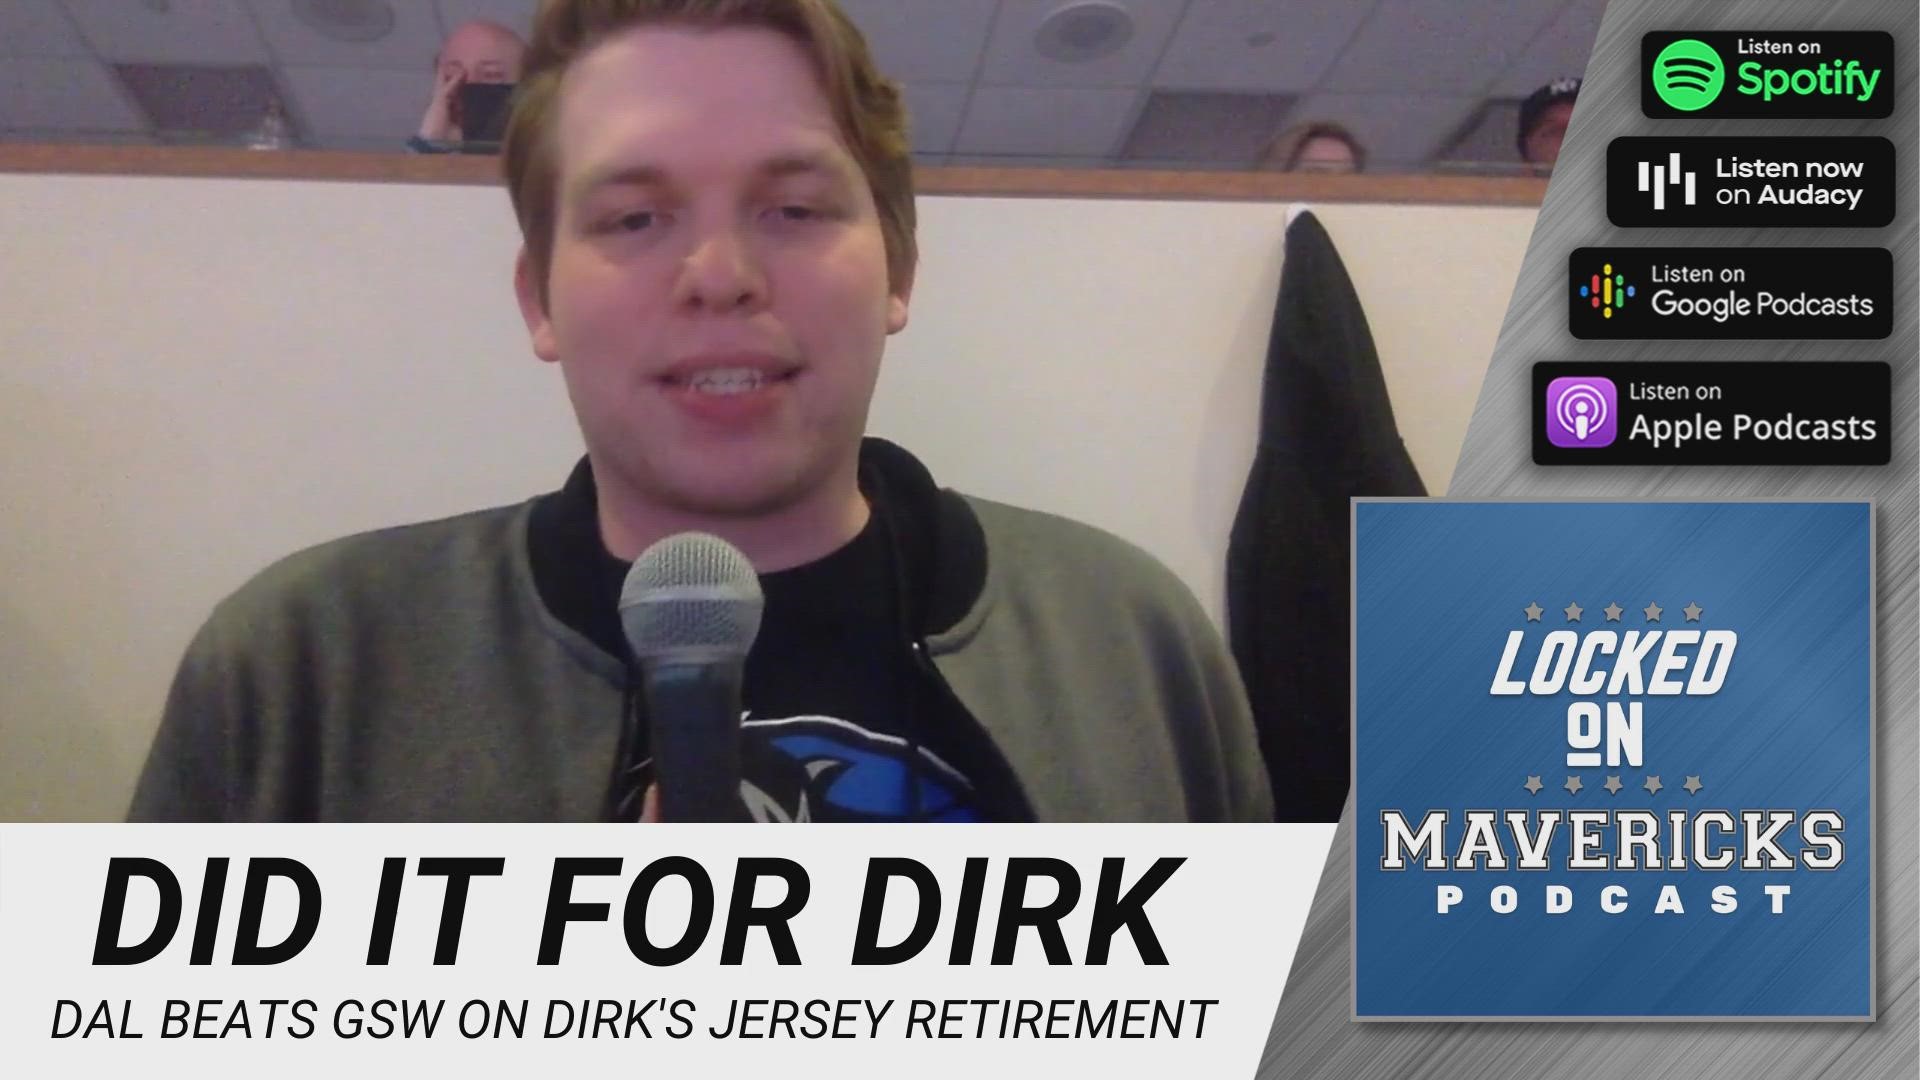 The Mavs got the win over Golden State, but it was all about Dirk. @nickvanexit talks about how fans and former players turned out to honor the GOAT.